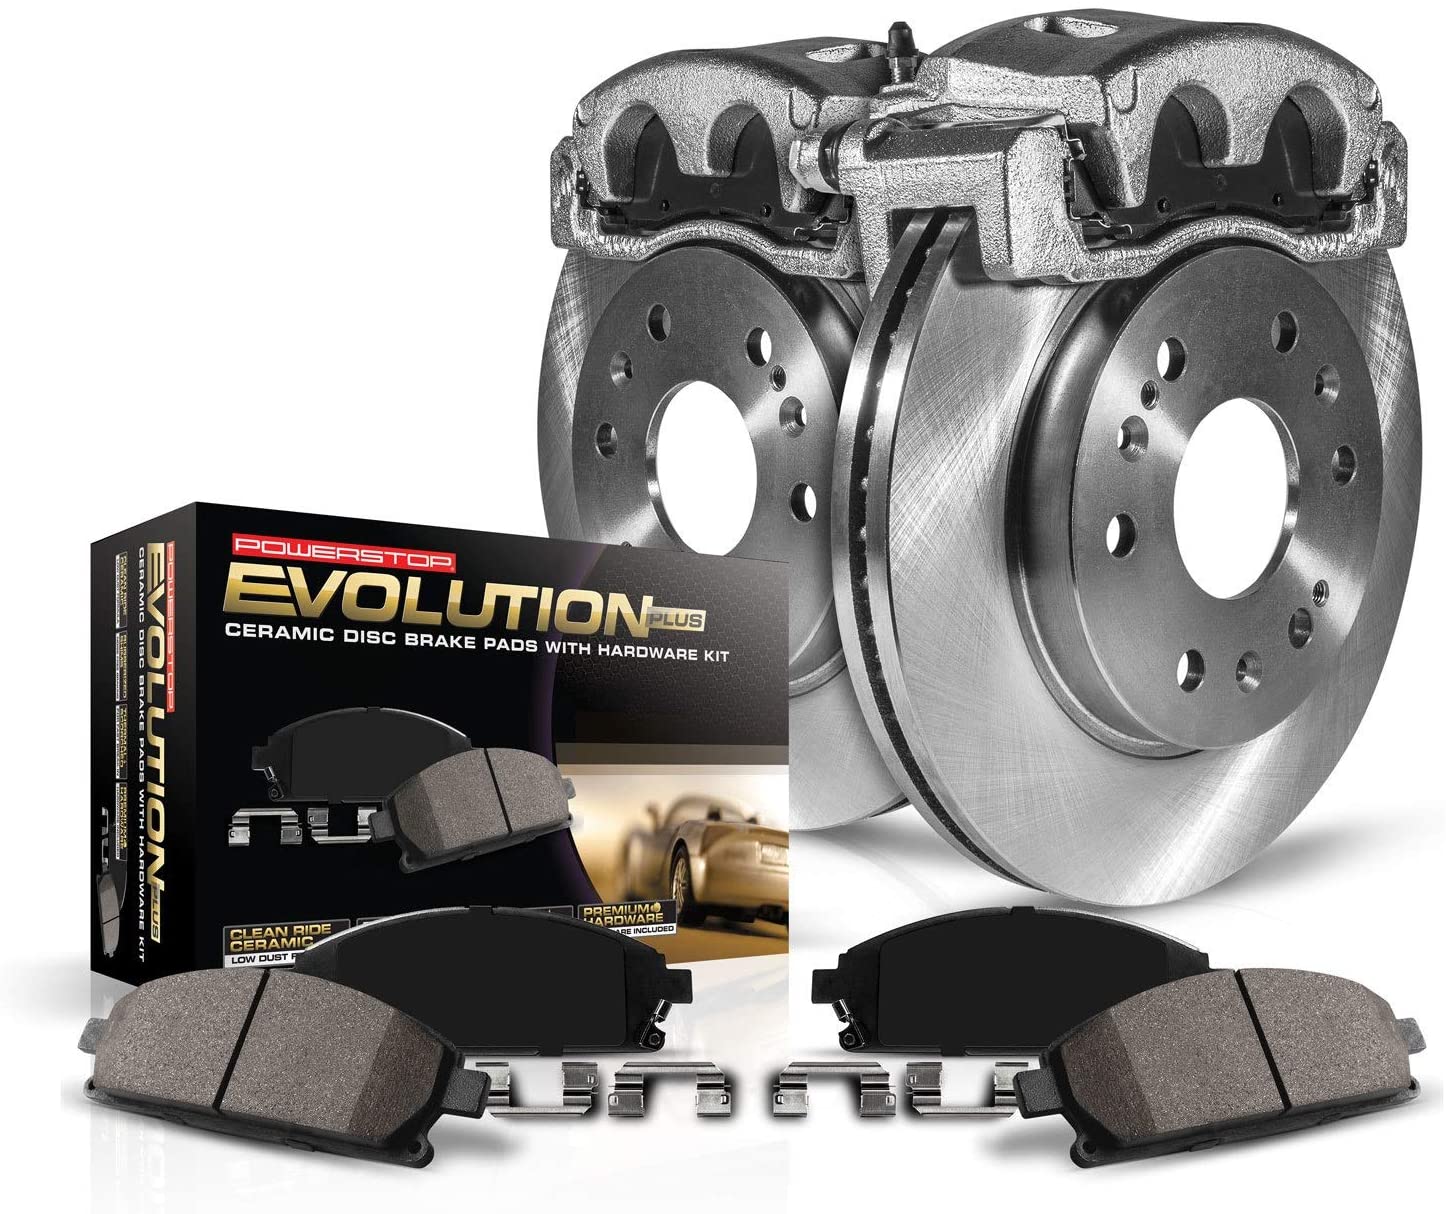 Power Stop KCOE4669 Autospeciality Replacement Front Caliper Kit- OE Rotors, Ceramic Brake Pads, Calipers